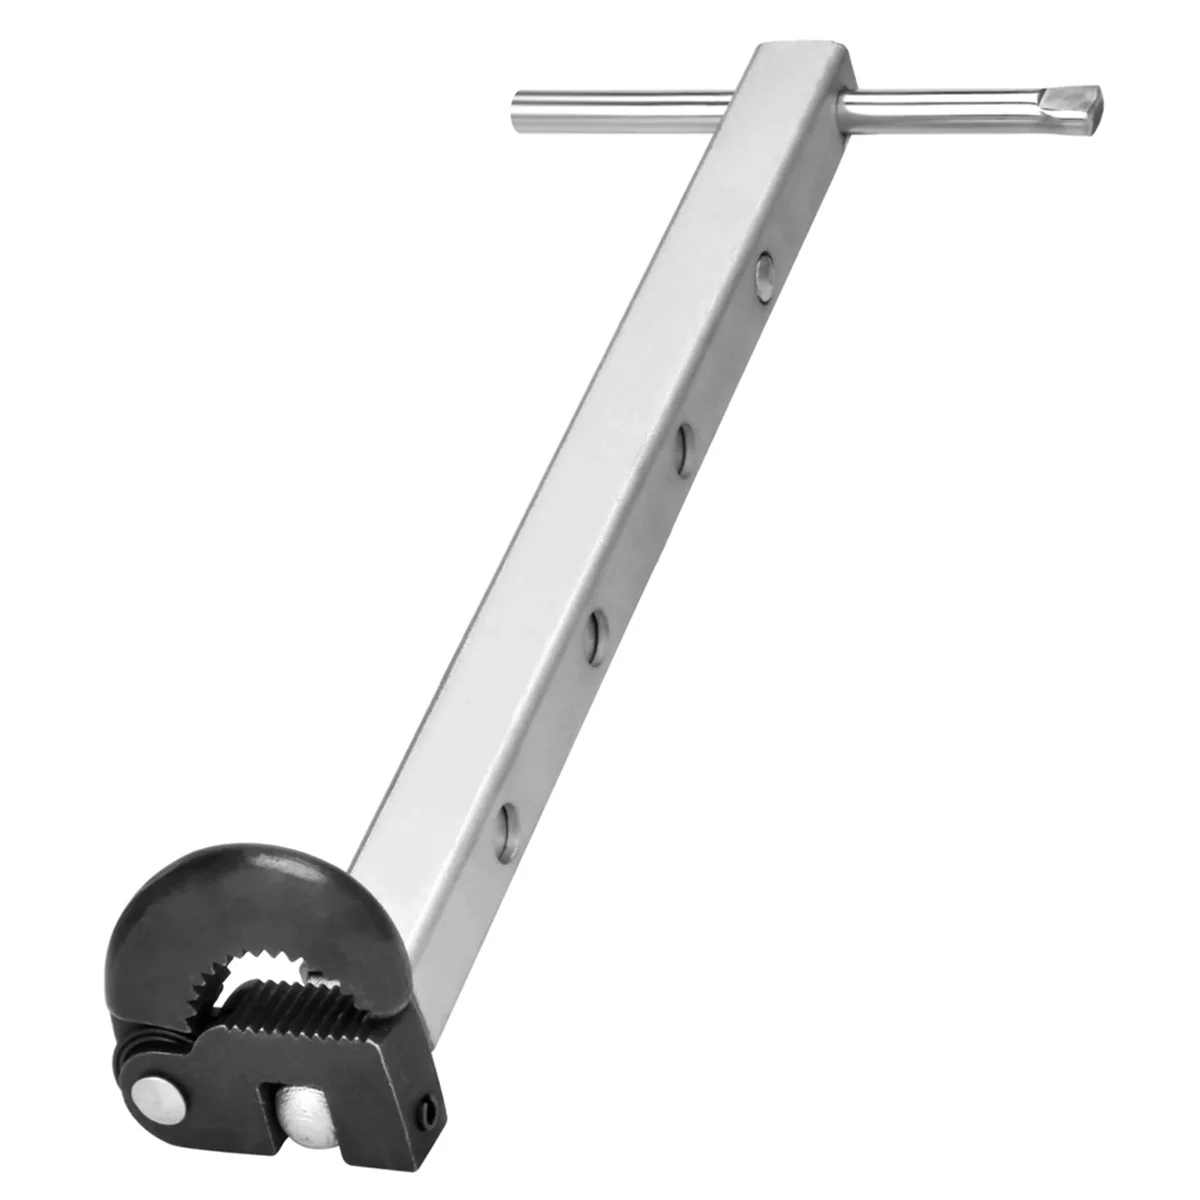 

Telescoping Basin Wrench Adjustable 3/8In to 1-1/4In Jaw Capacity,Sink Wrench for Tub Drain Plumber Wrenches Tool